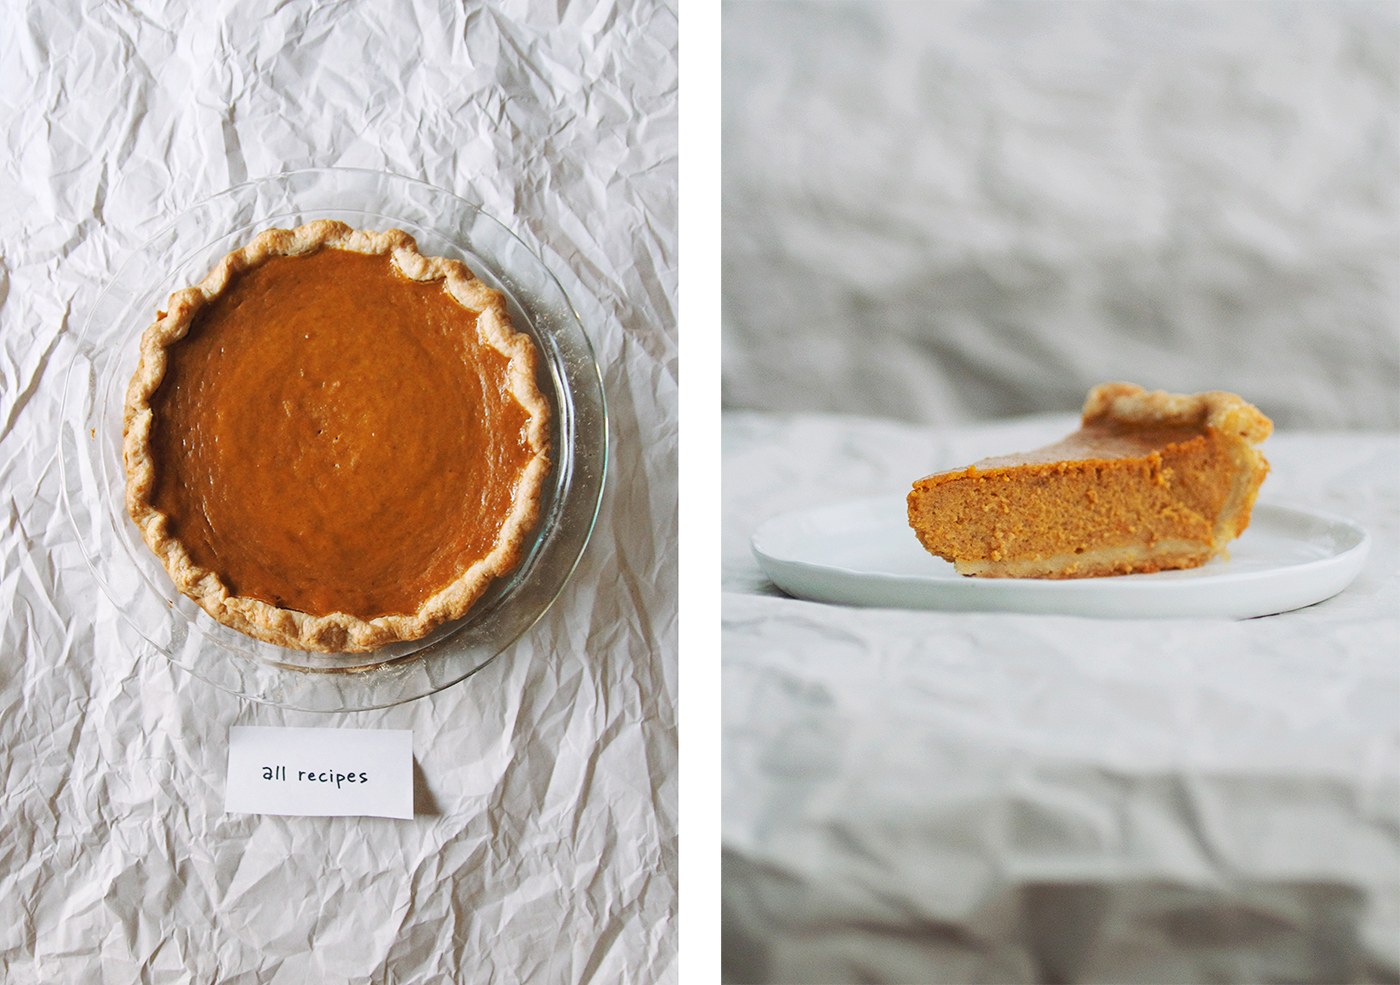 From left to right: Overhead view and sideview of All Recipes pumpkin pie recipe